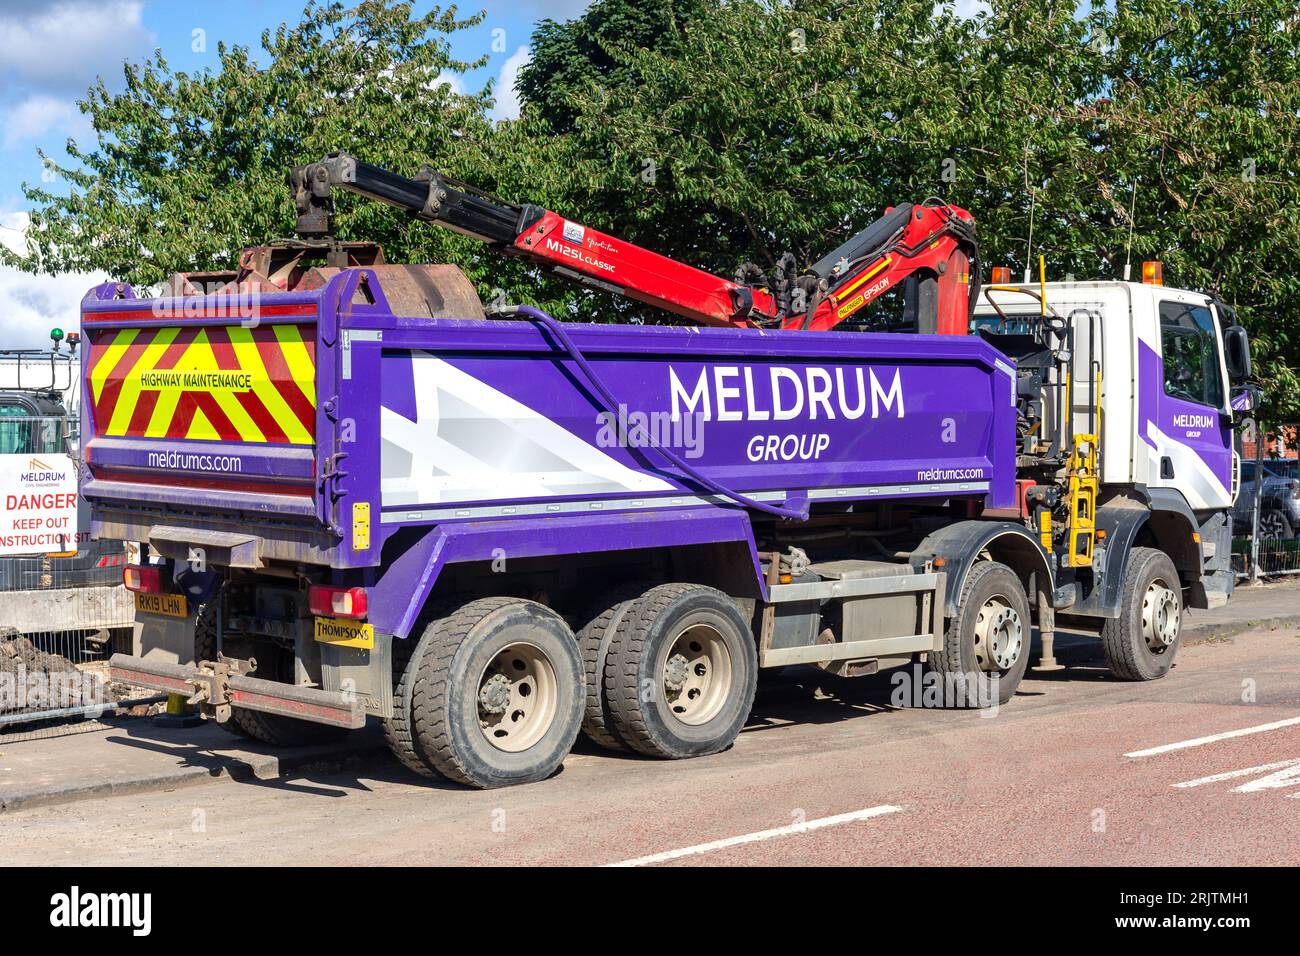 Meldrum Group lorry loader at construction site, St James Road, Gateshead, Tyne and Wear, England, United Kingdom Stock Photo